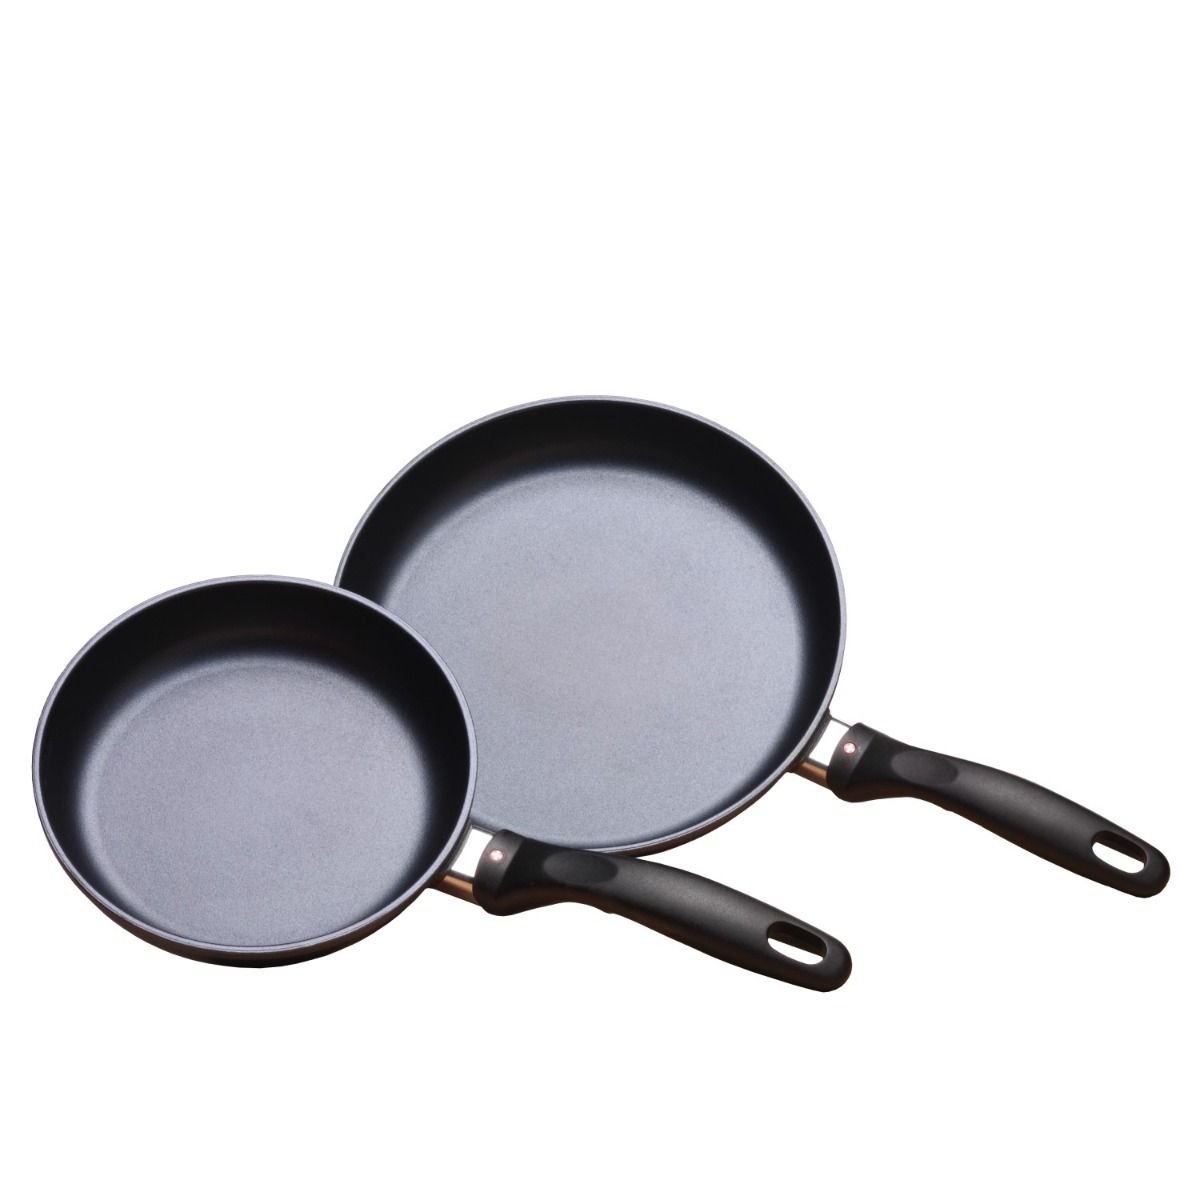 Swiss Diamond HD 11 Nonstick Fry Pan with Glass Lid - Induction